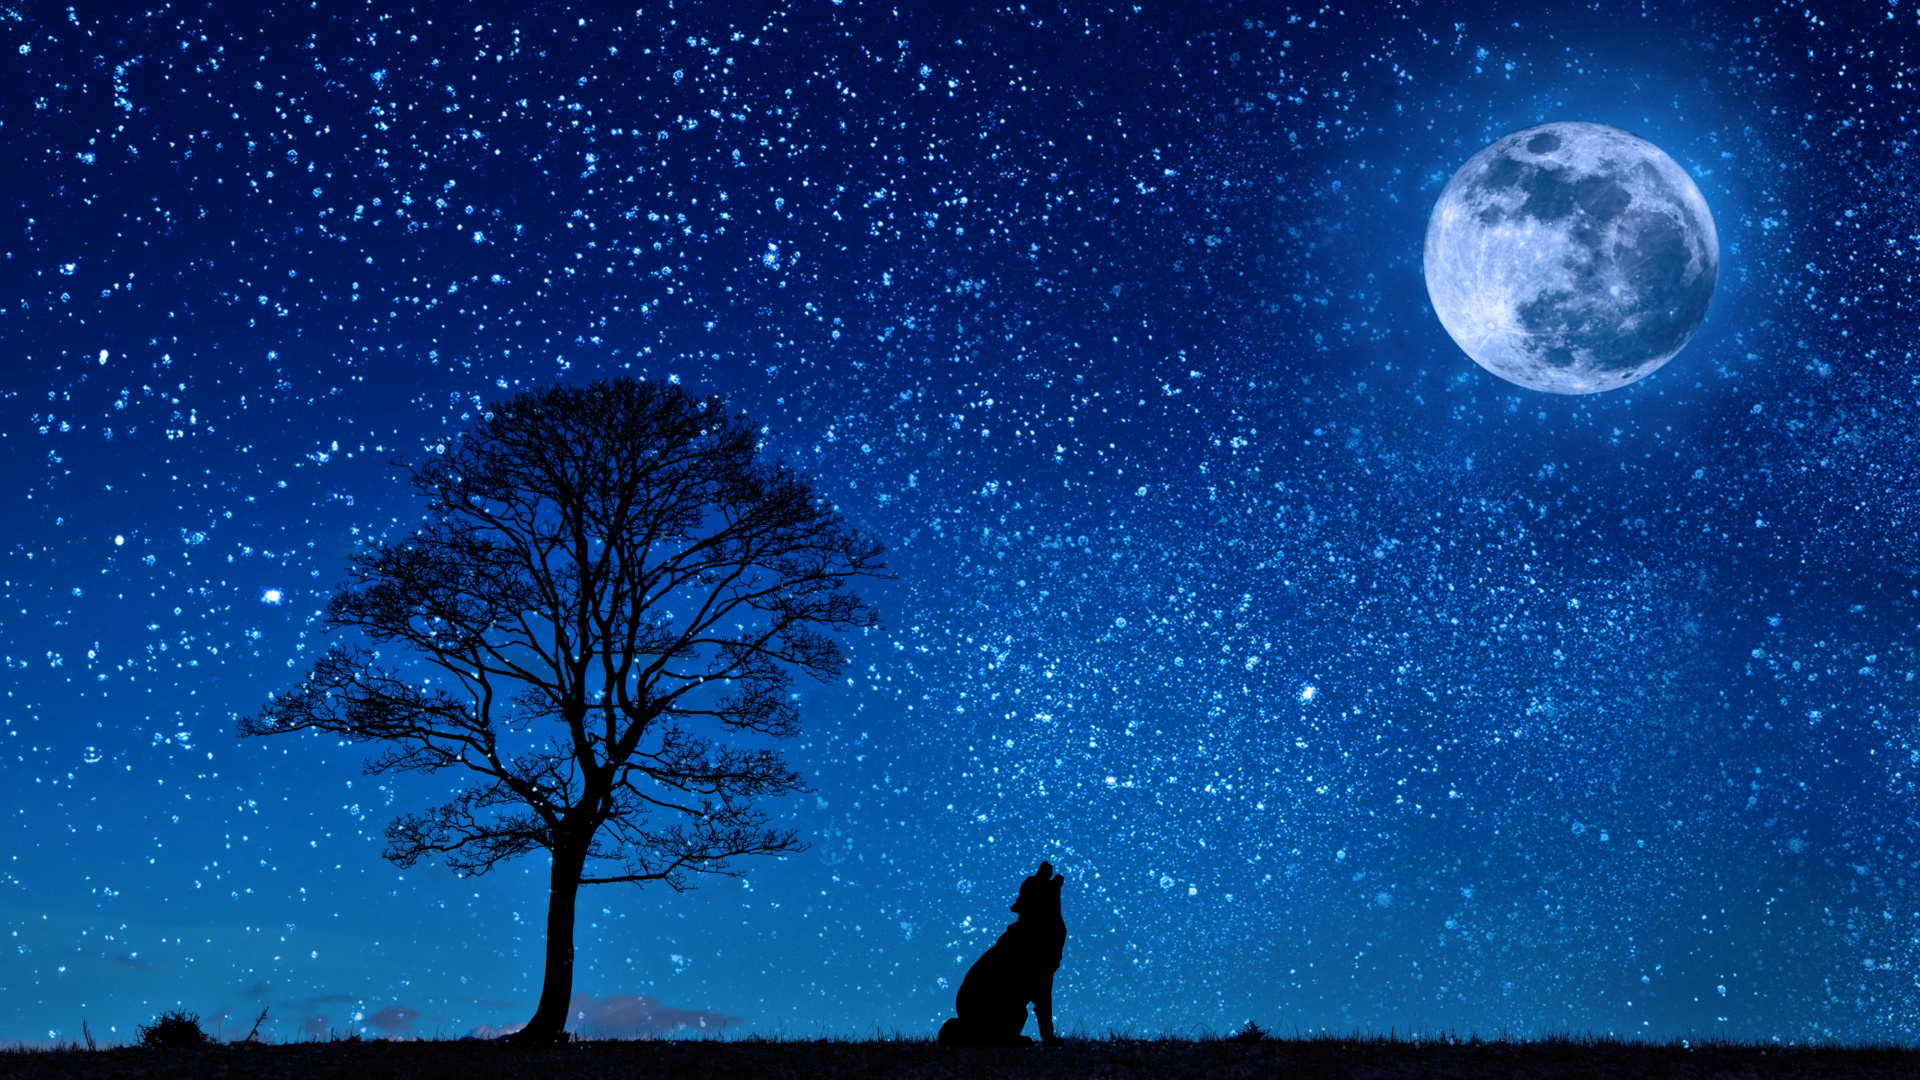 Silhouette of Man Standing Near Bare Tree Under Blue Sky During Night Time. Wallpaper in 1920x1080 Resolution